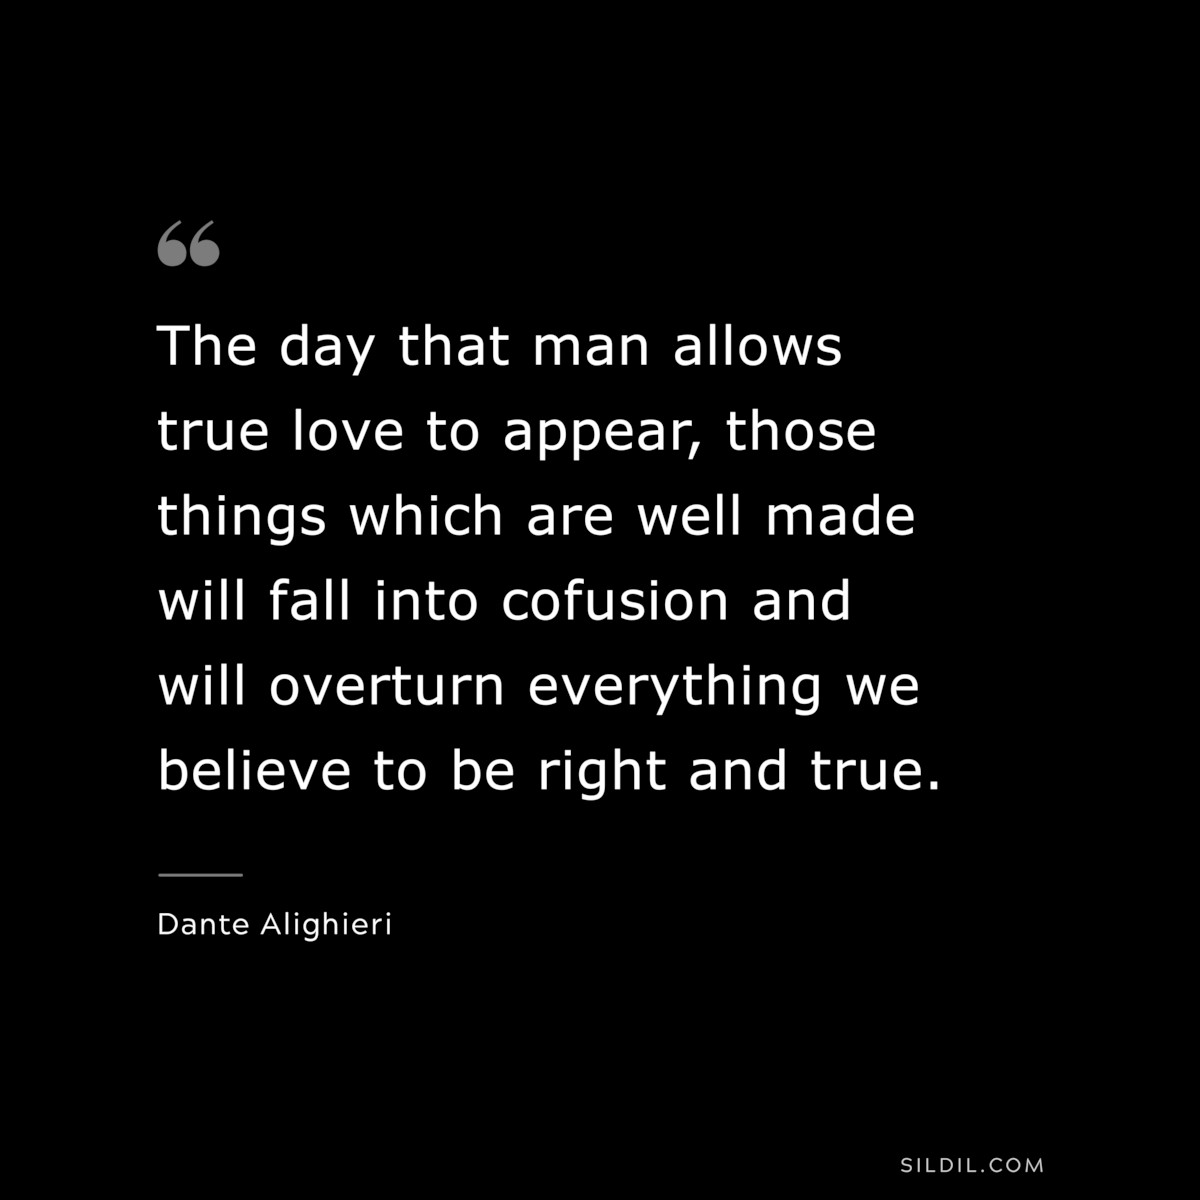 The day that man allows true love to appear, those things which are well made will fall into cofusion and will overturn everything we believe to be right and true. ― Dante Alighieri